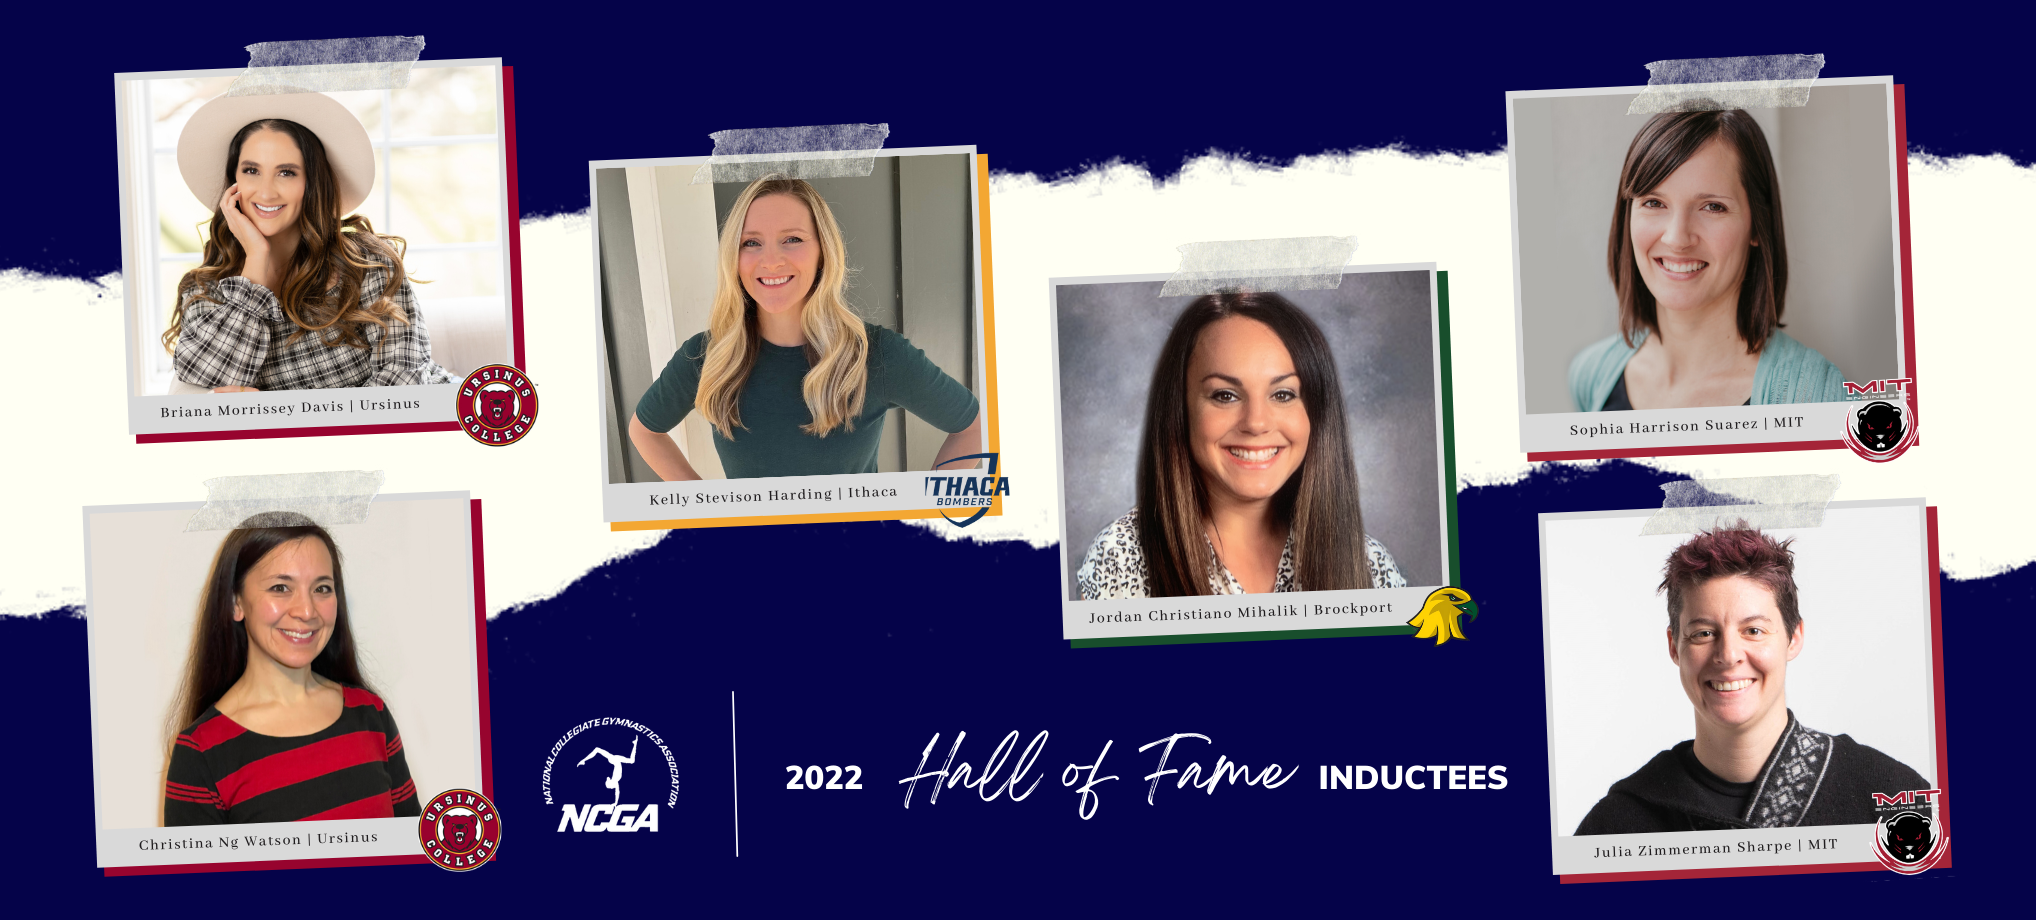 Ithaca College to Host 2022 NCGA National Gymnastics Championship & Honor Hall of Fame Members